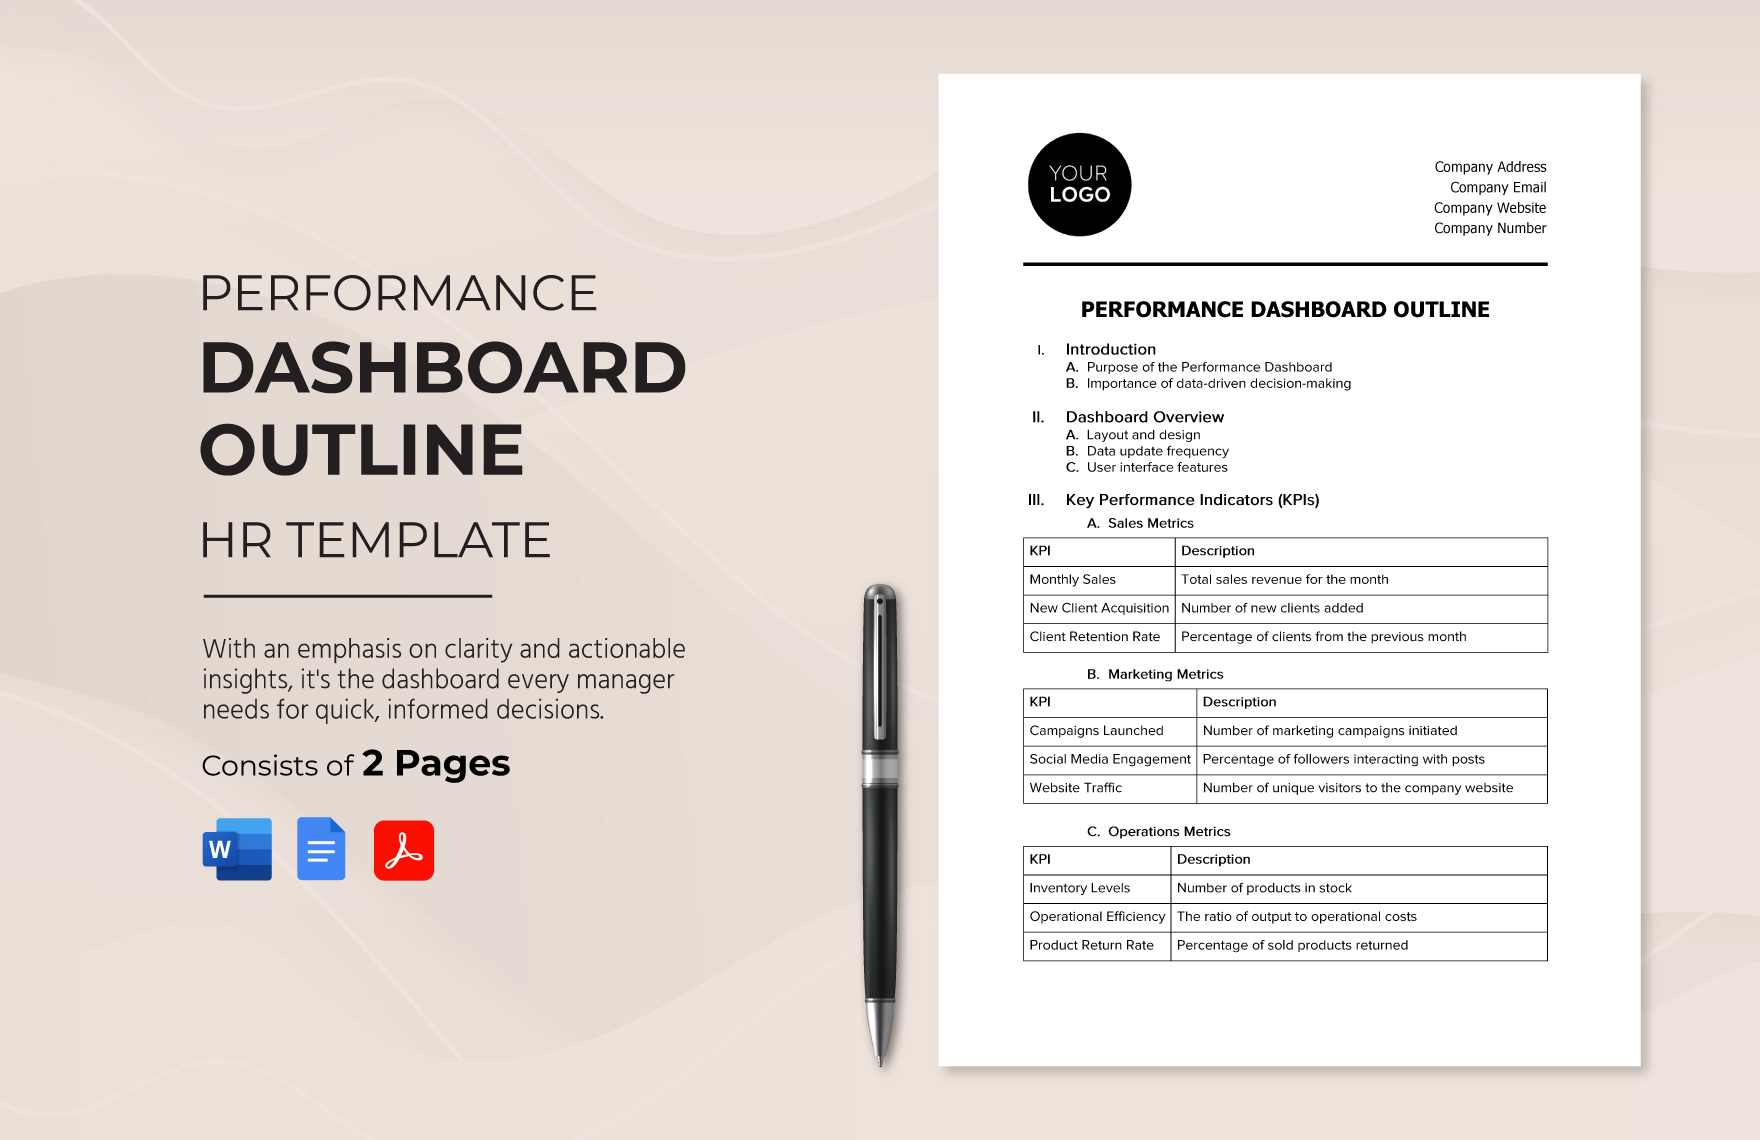 Performance Dashboard Outline HR Template